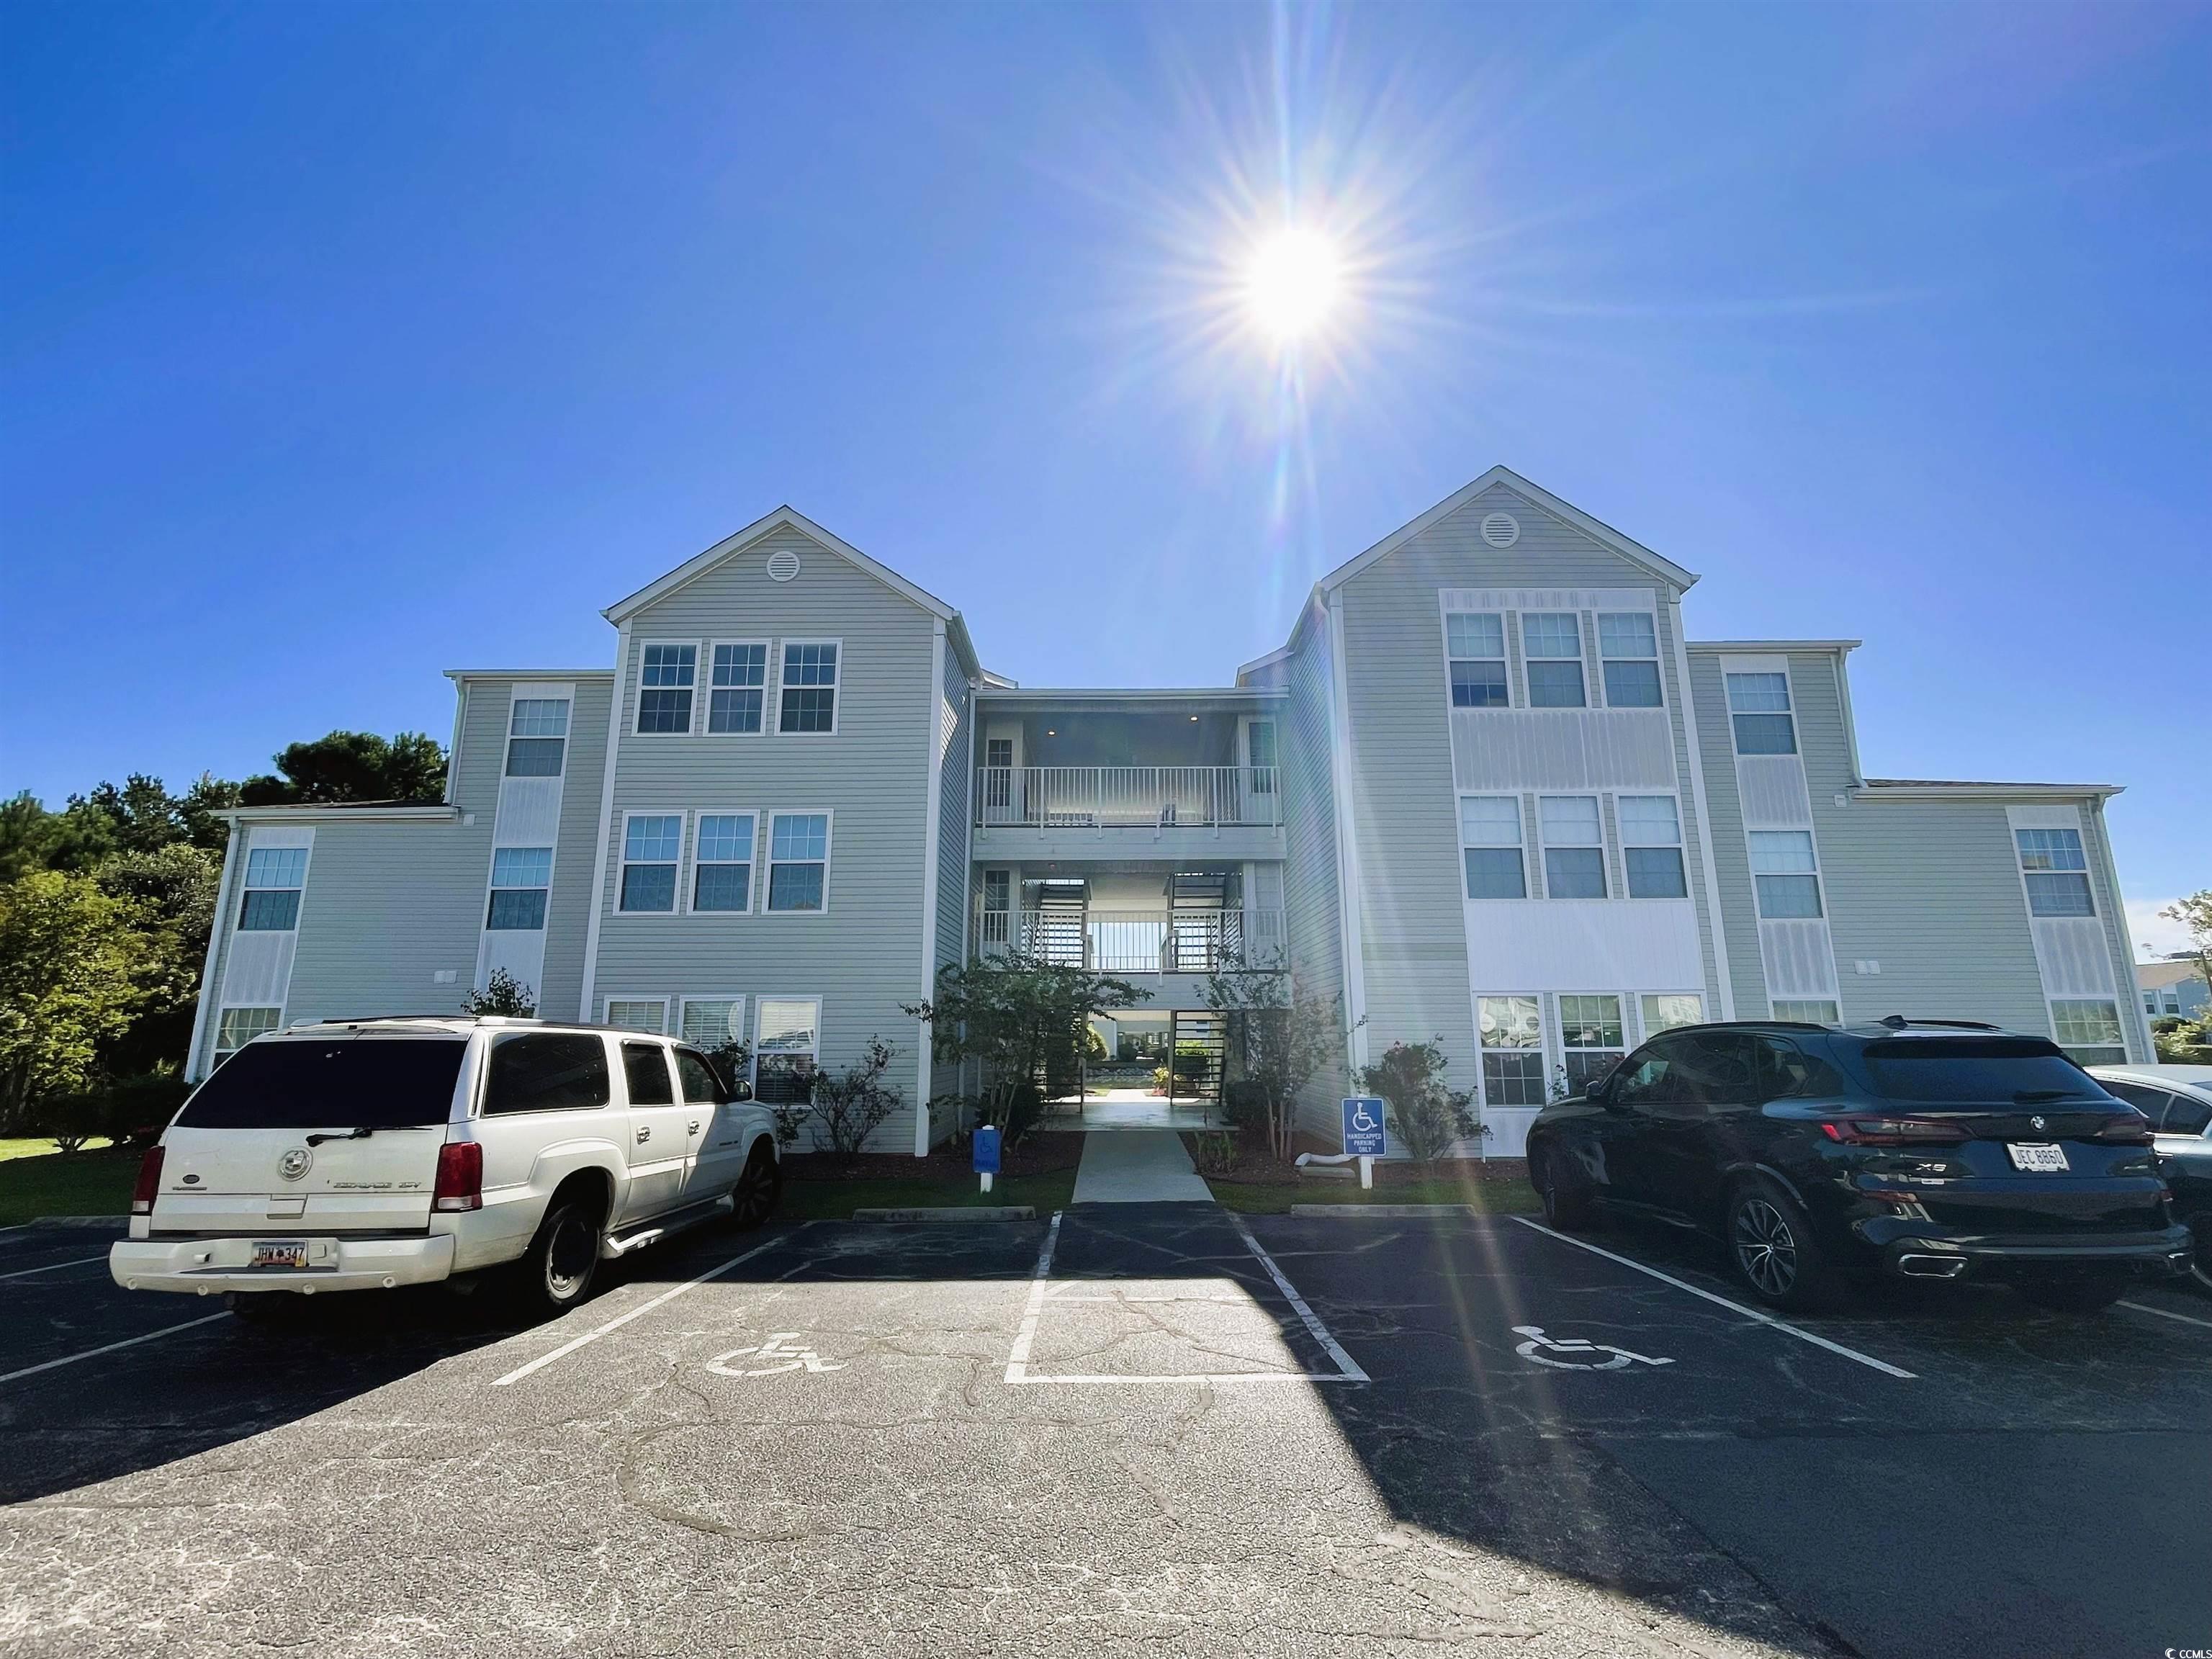 a rare gem close to surfside beach! this first floor unit in the desirable southbridge community is ready for it's new owners! it features two bedrooms, two full bathrooms, a carolina room with plenty of natural light, ample storage and an open kitchen living room combination! take a five minute drive and your toes are in the beautiful surfside beach sand with beautiful atlantic ocean views! schedule your appointment today to see this spacious unit today!